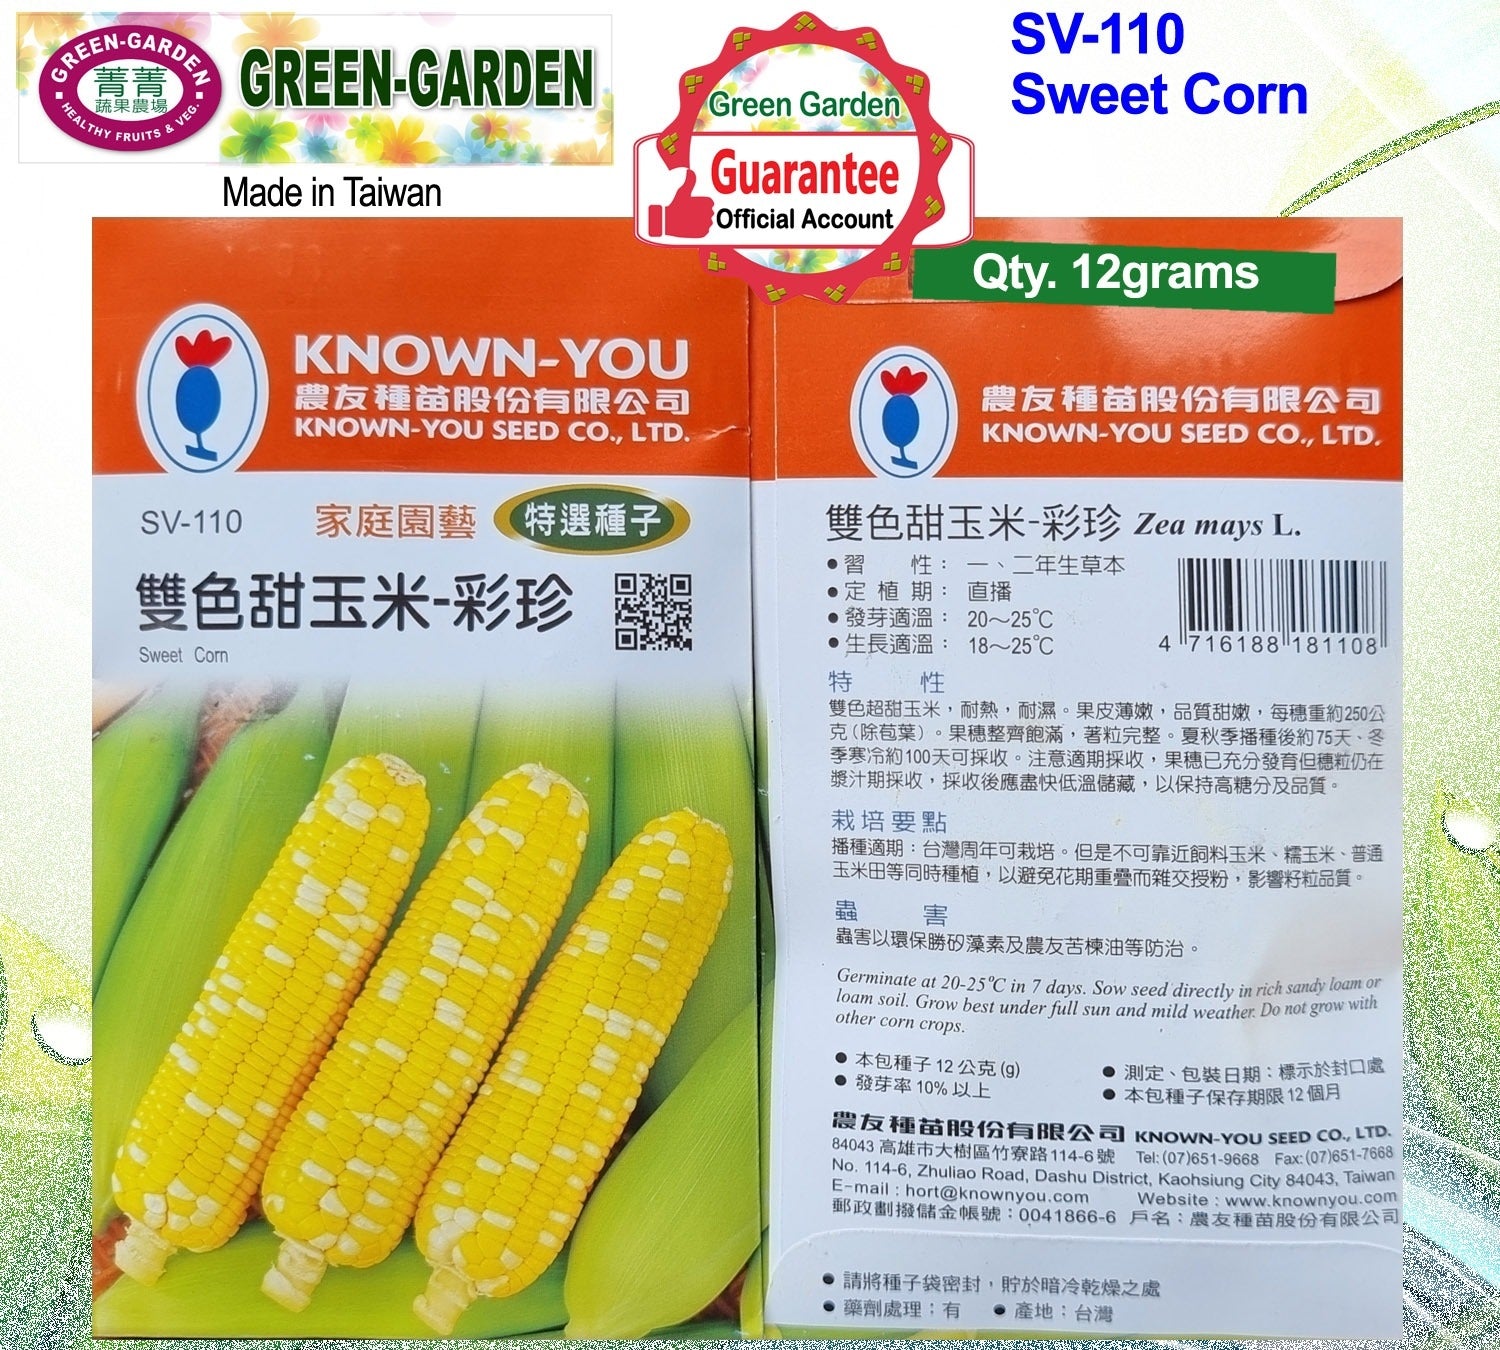 Known You Special Seeds (SV-110 Sweet Corn)